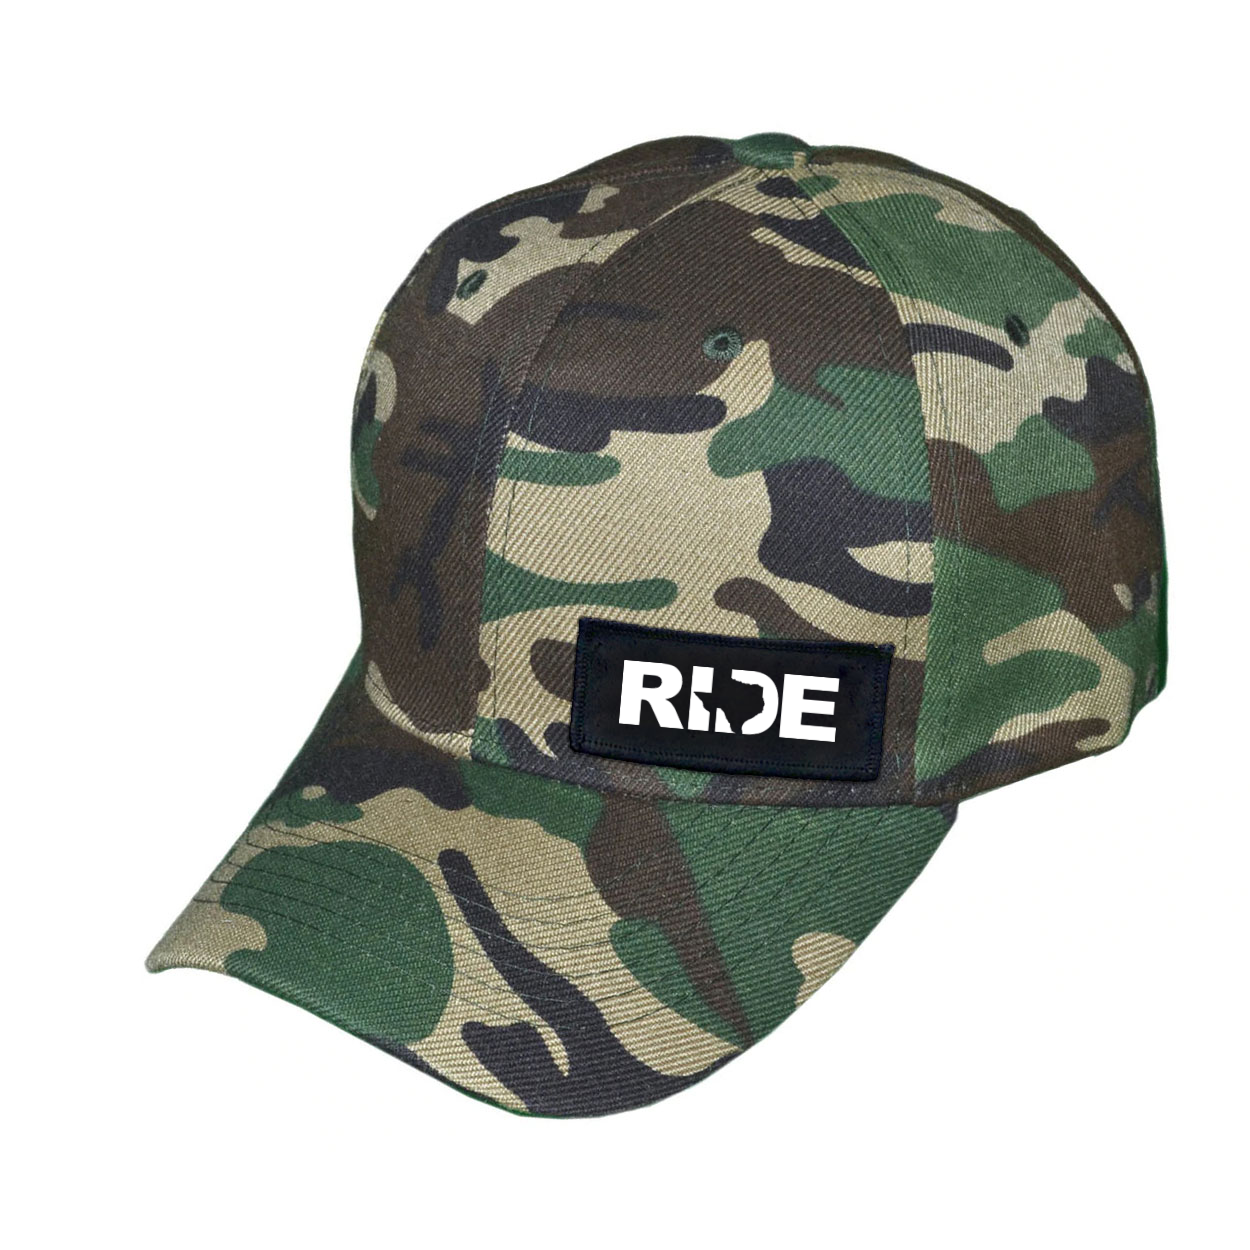 Ride Texas Night Out Woven Patch Velcro Trucker Hat Camo